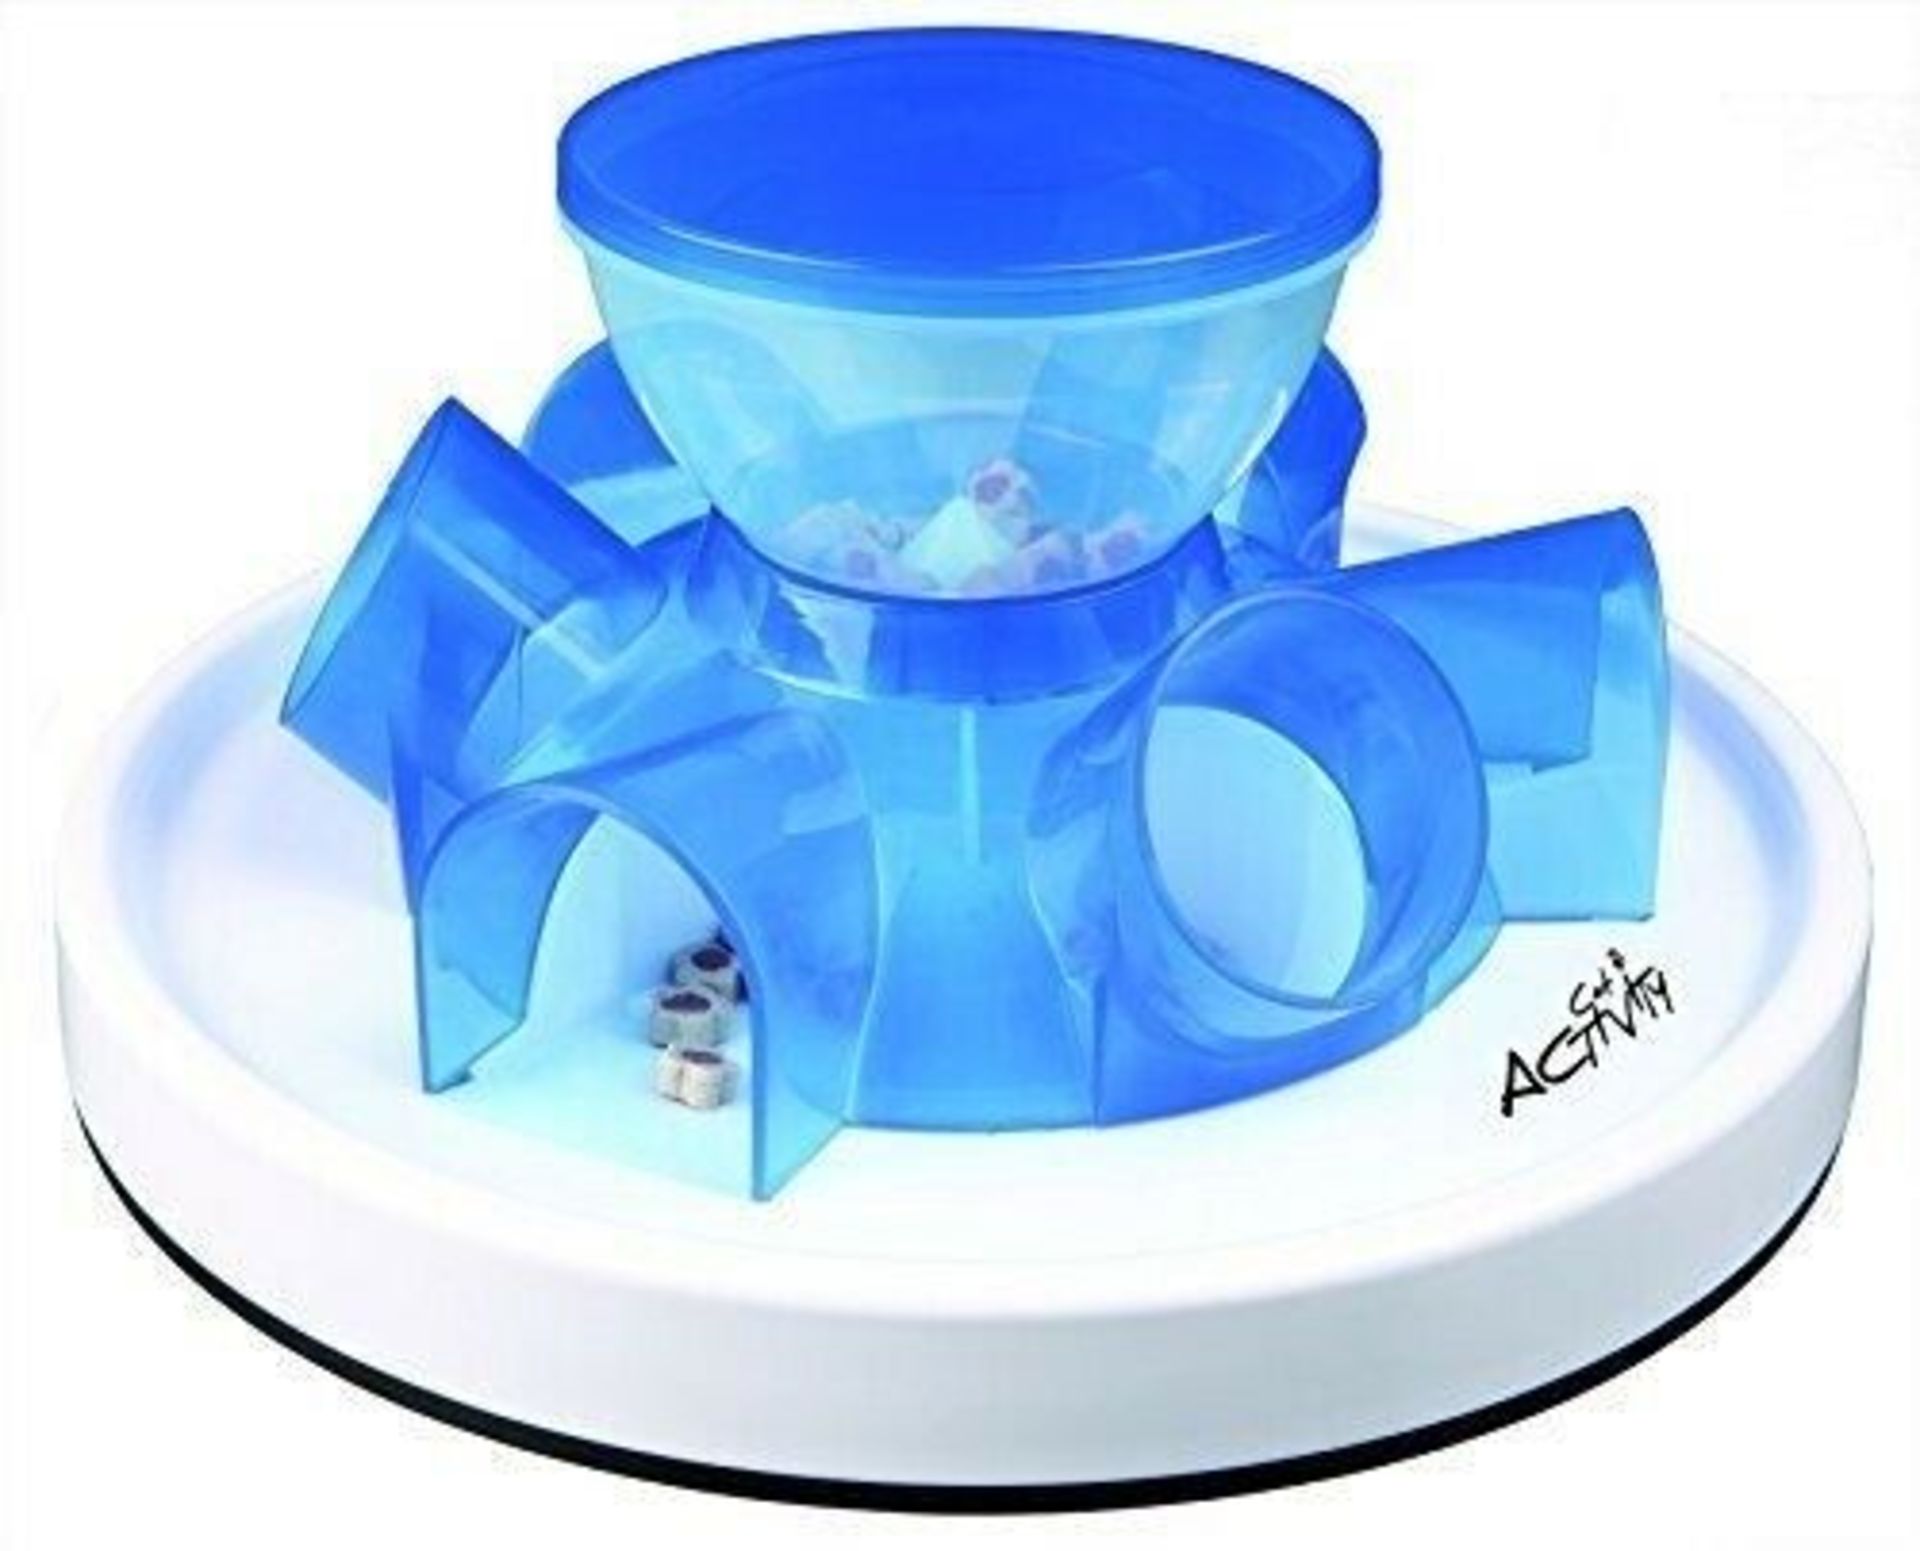 2 x Trixie Cat Activity Tunnel Feeder. 28cm no vat on hammer.You will get 2 of these.Feed falls from